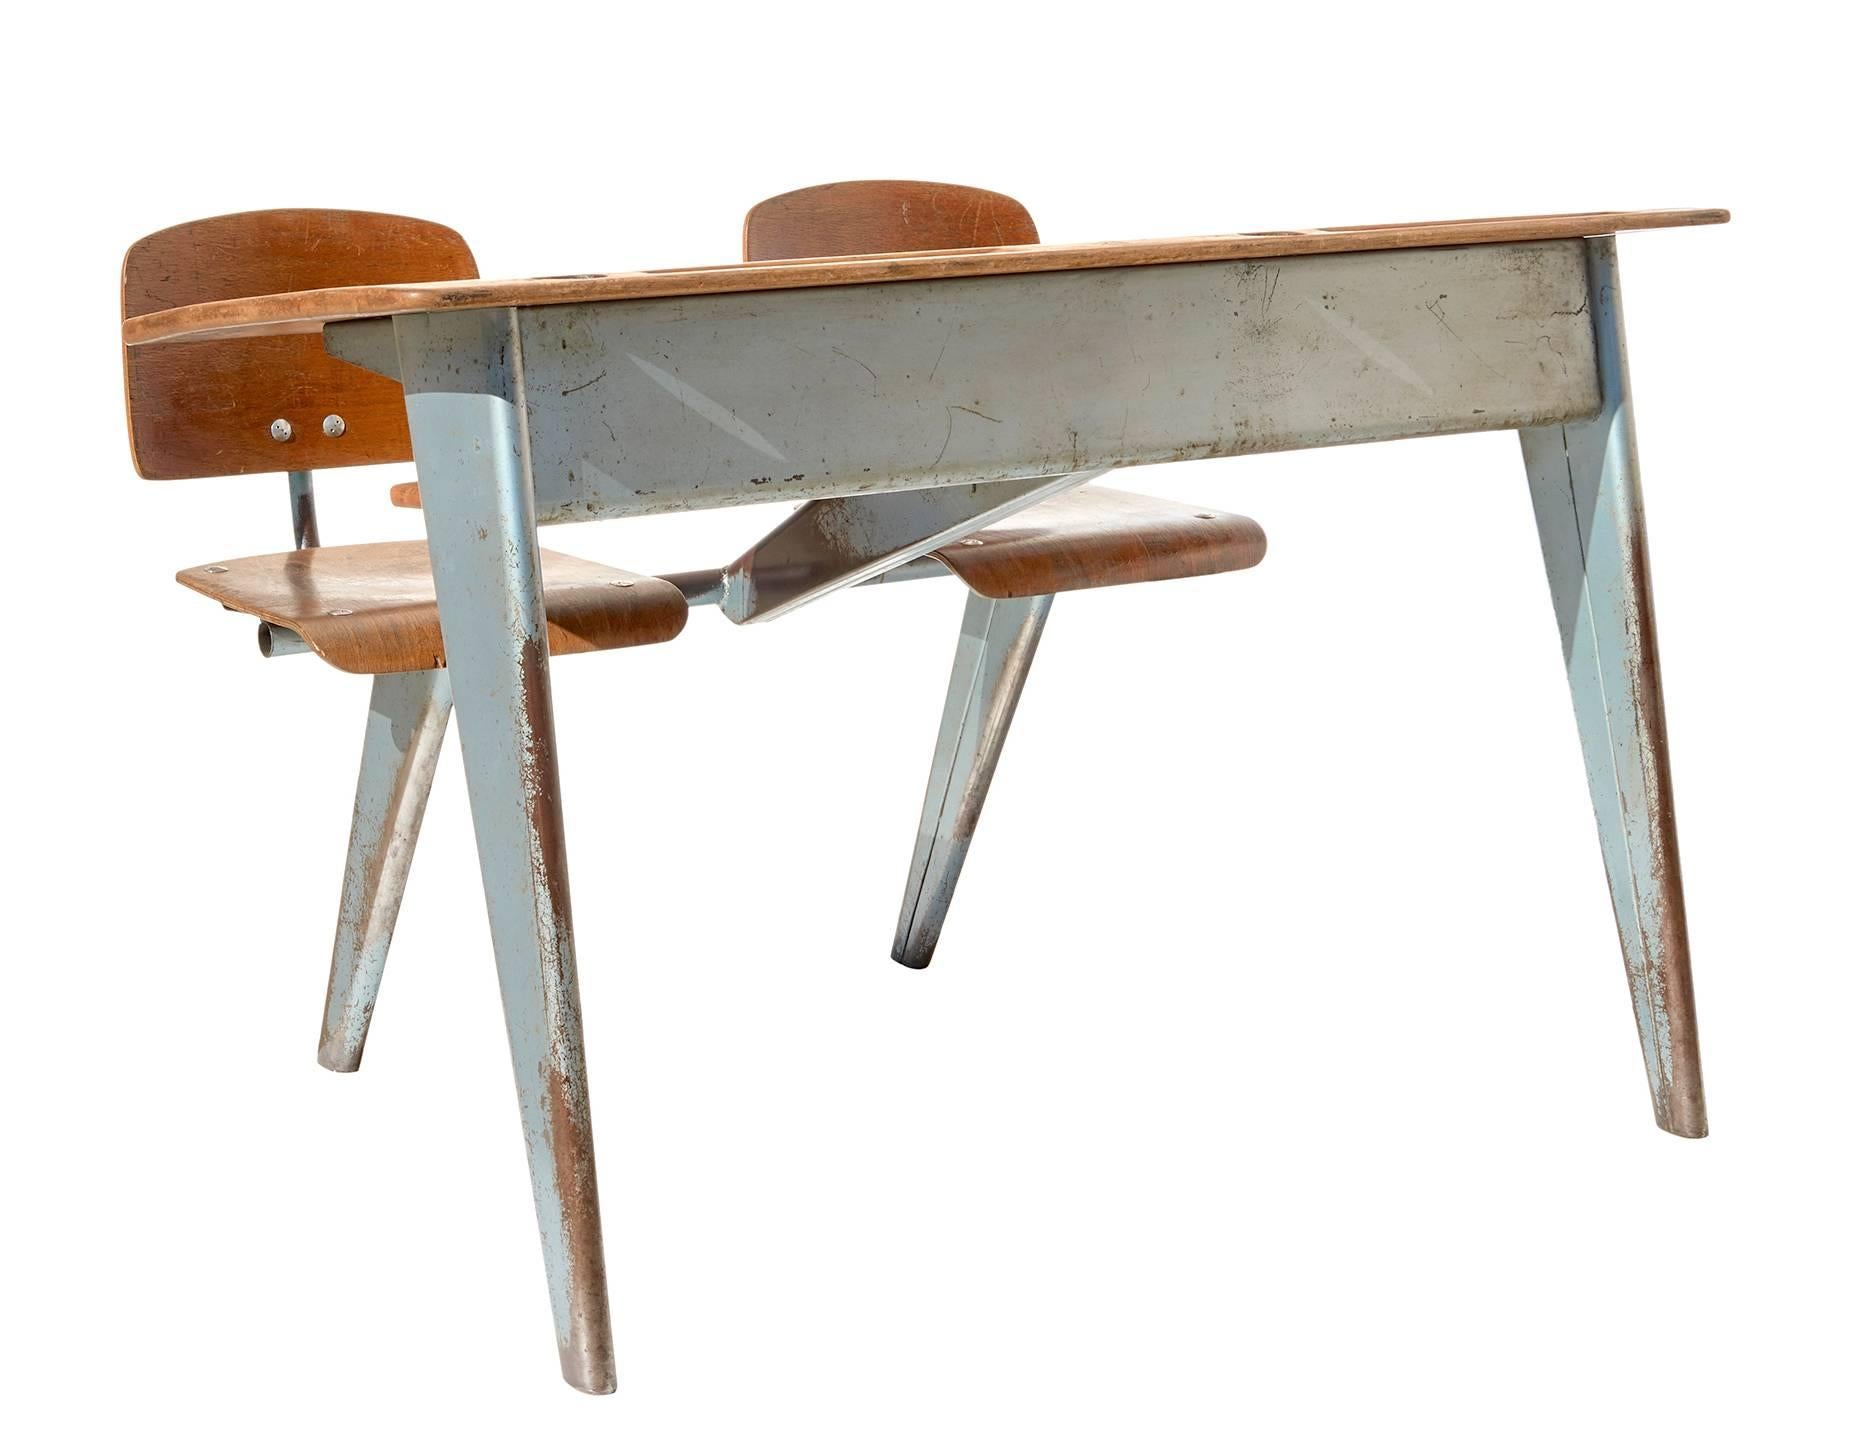 Designed by Jean Prouvé in 1946, and made by his atelier for a few years thereafter, this futuristic-yet-ancient-looking desk for two is in completely original condition, with a gorgeous patina produced by seven decades of French schoolchildren